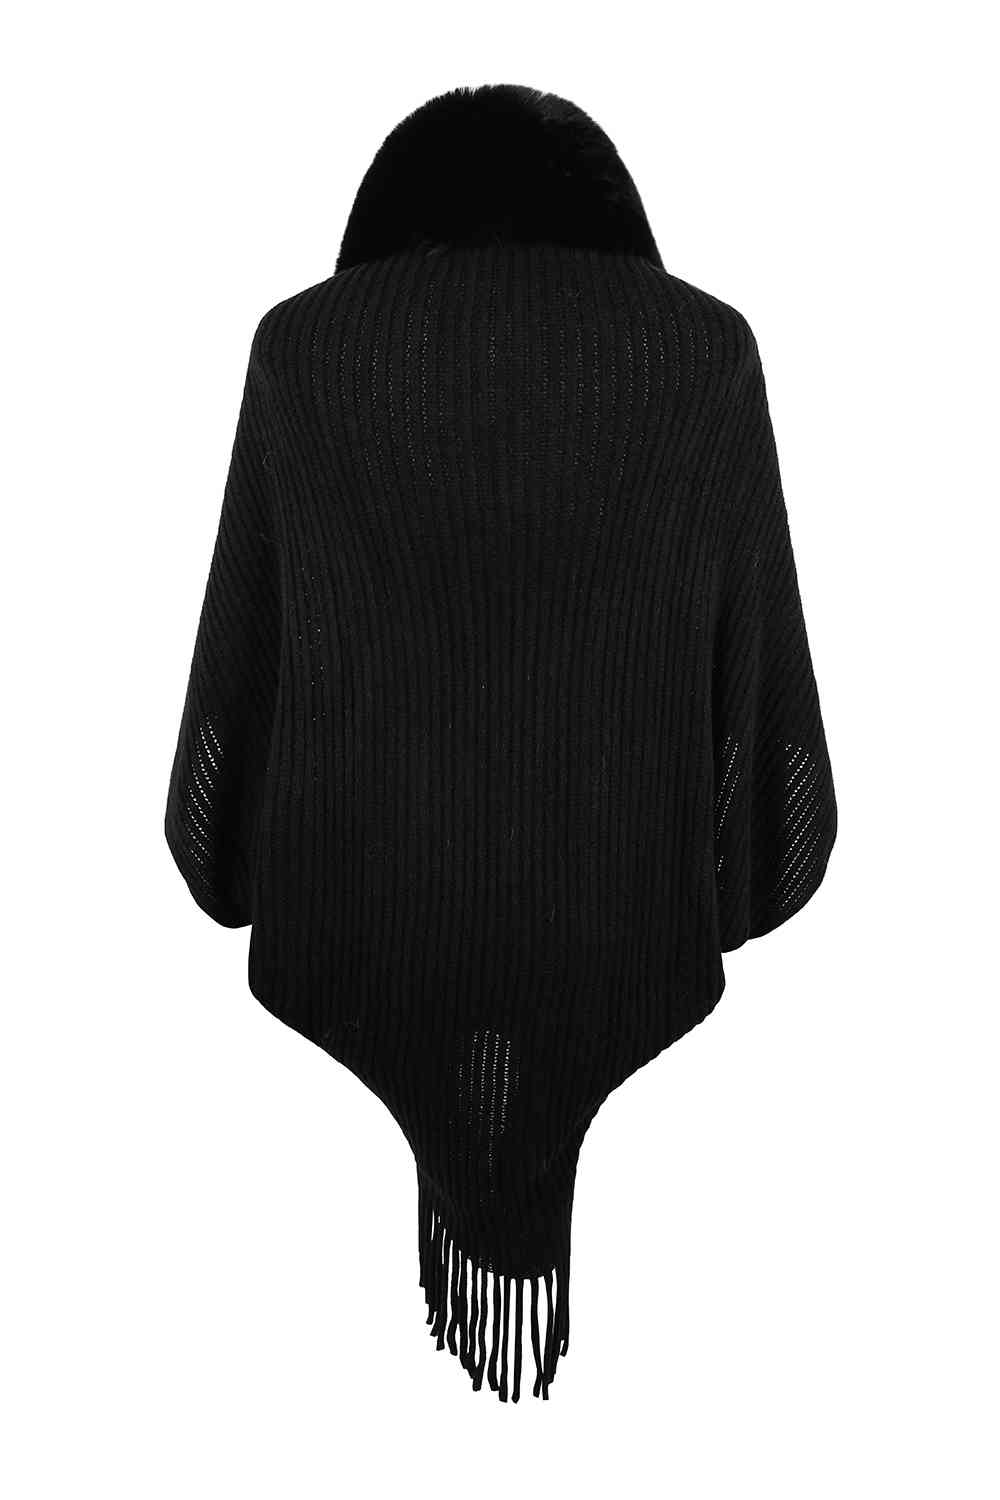 Back of black open front poncho with fringe and faux fur trim